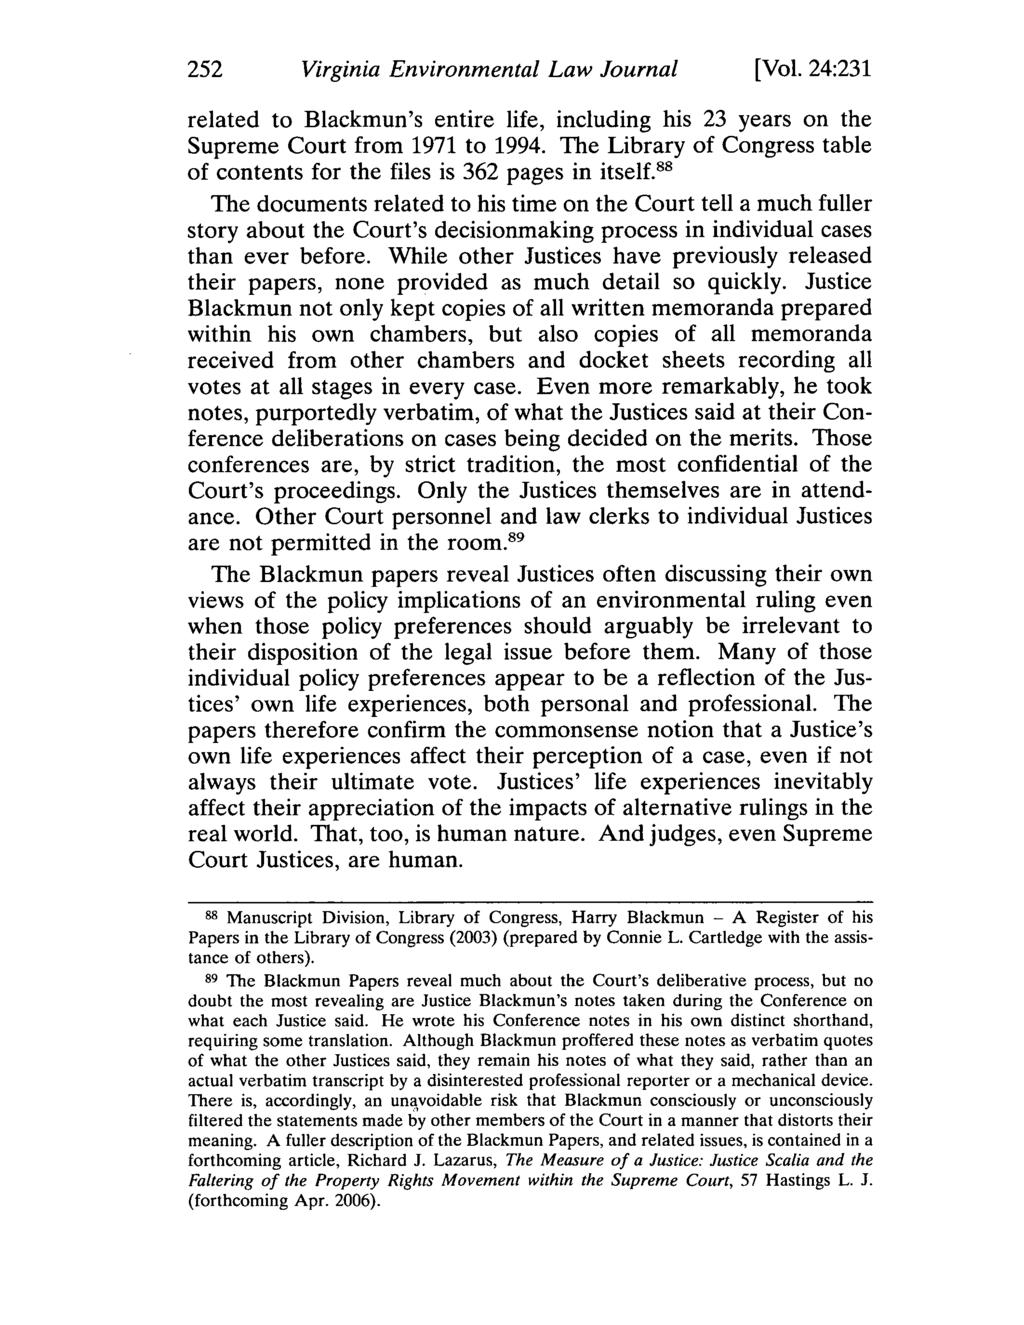 252 Virginia Environmental Law Journal [Vol. 24:231 related to Blackmun's entire life, including his 23 years on the Supreme Court from 1971 to 1994.